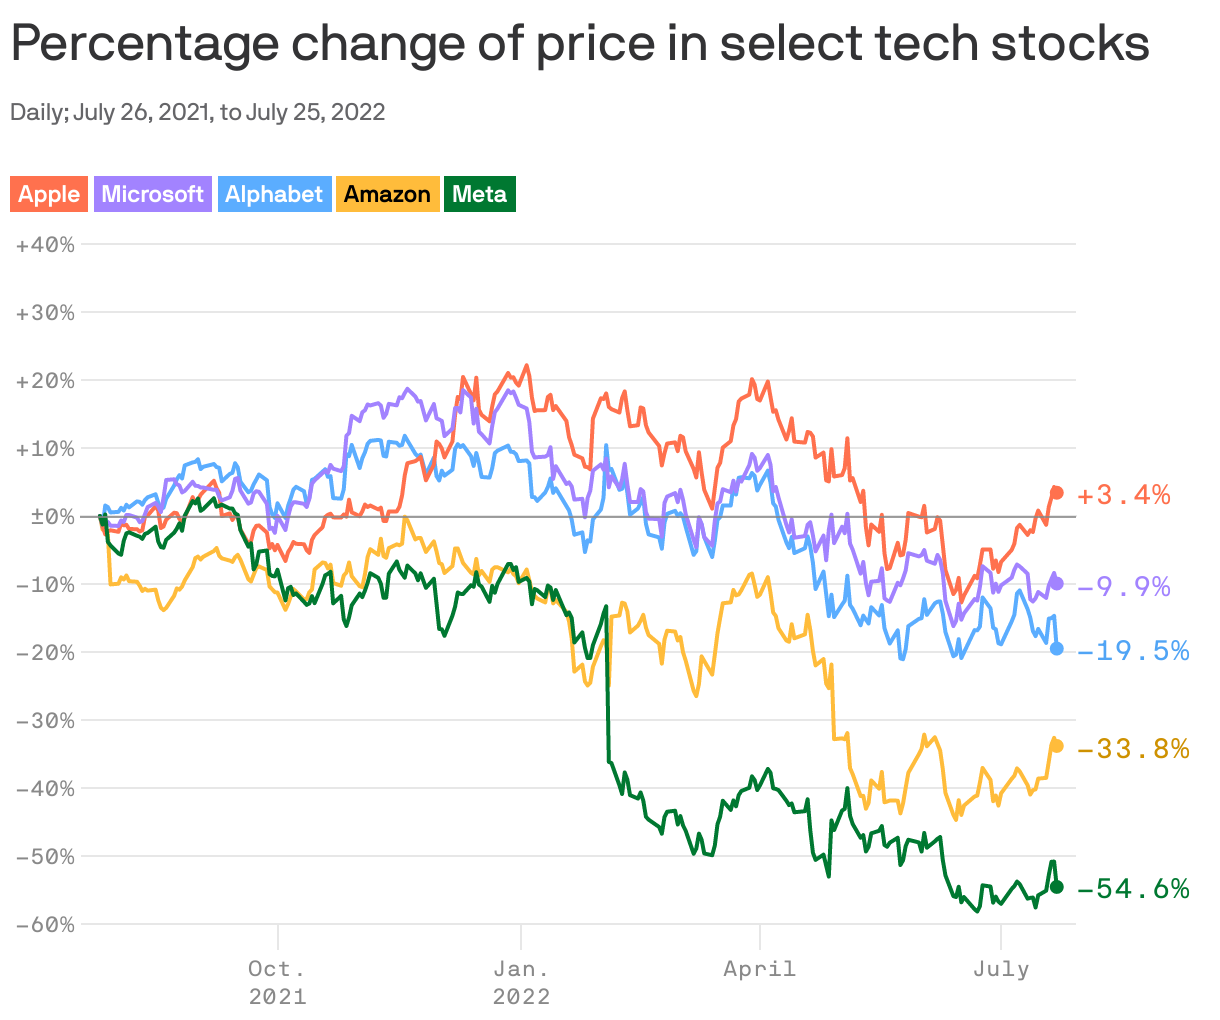 Percentage change of price in select tech stocks